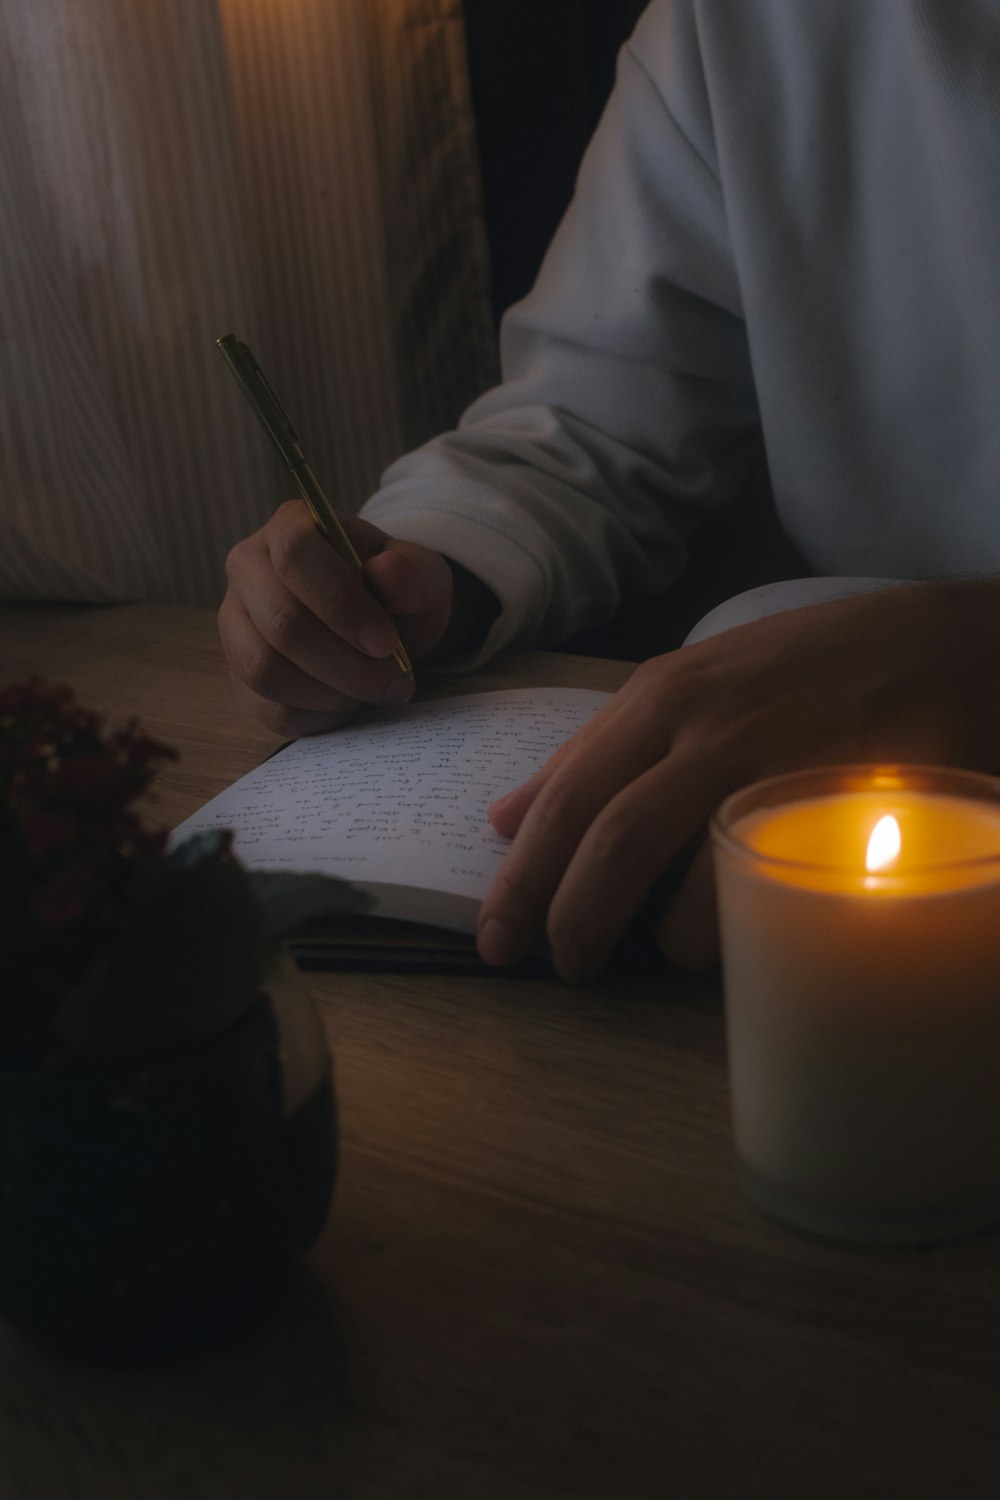 a person sitting at a table writing in a notebook next to a lit candle